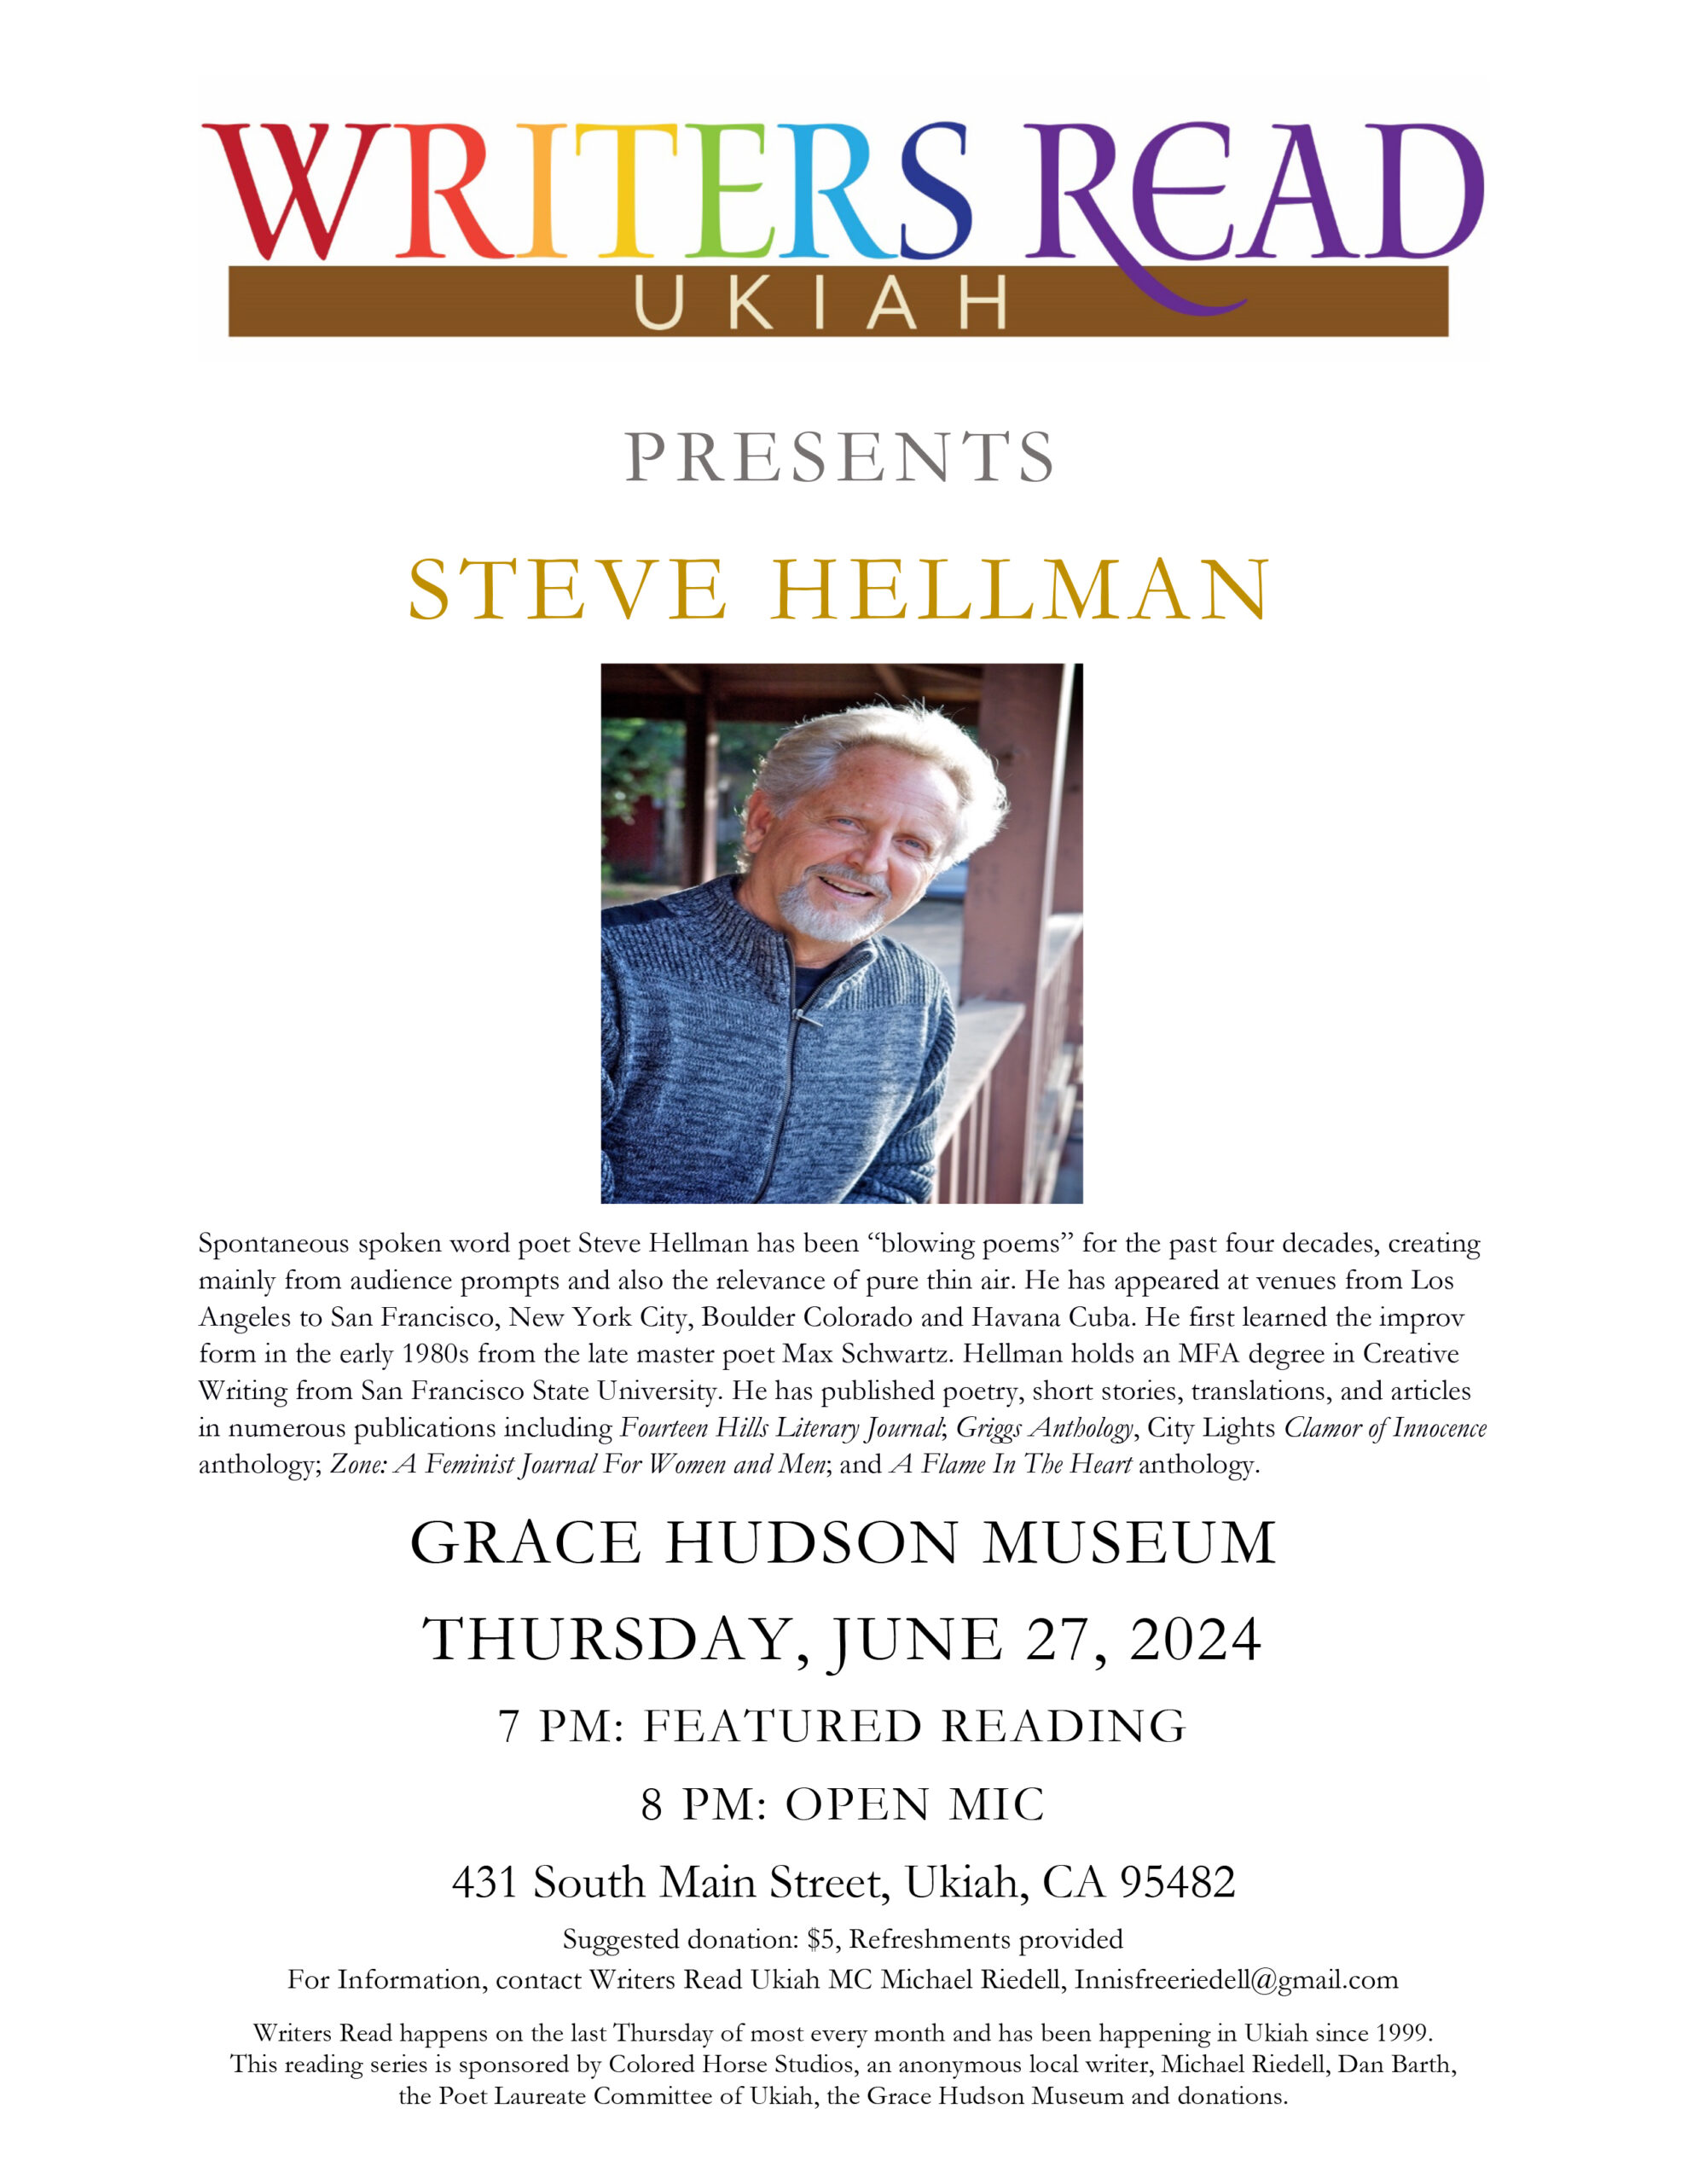 Steve Hellman, featured reader for Writers Read on 6/27/24